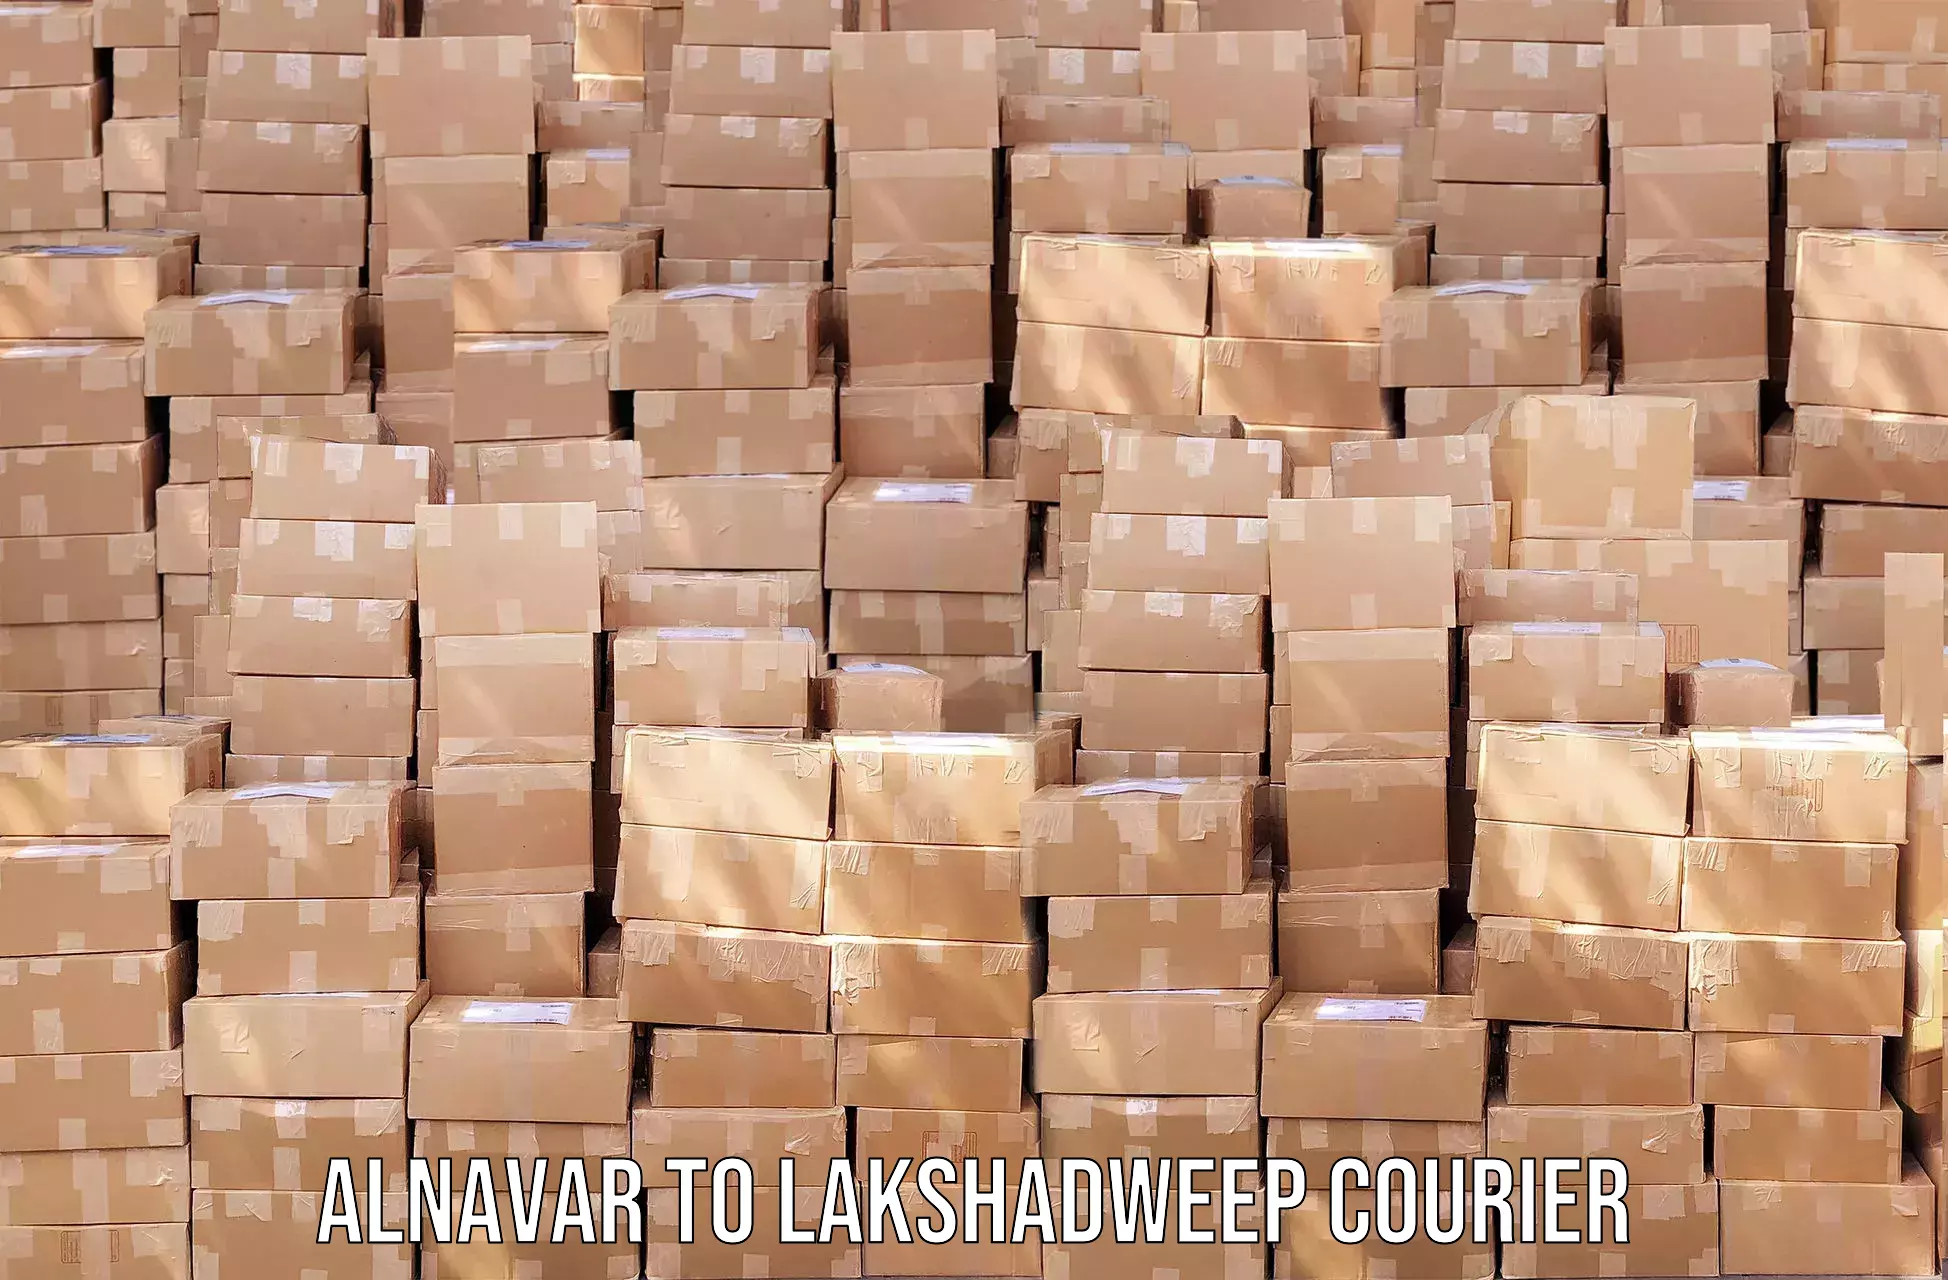 Courier service comparison in Alnavar to Lakshadweep